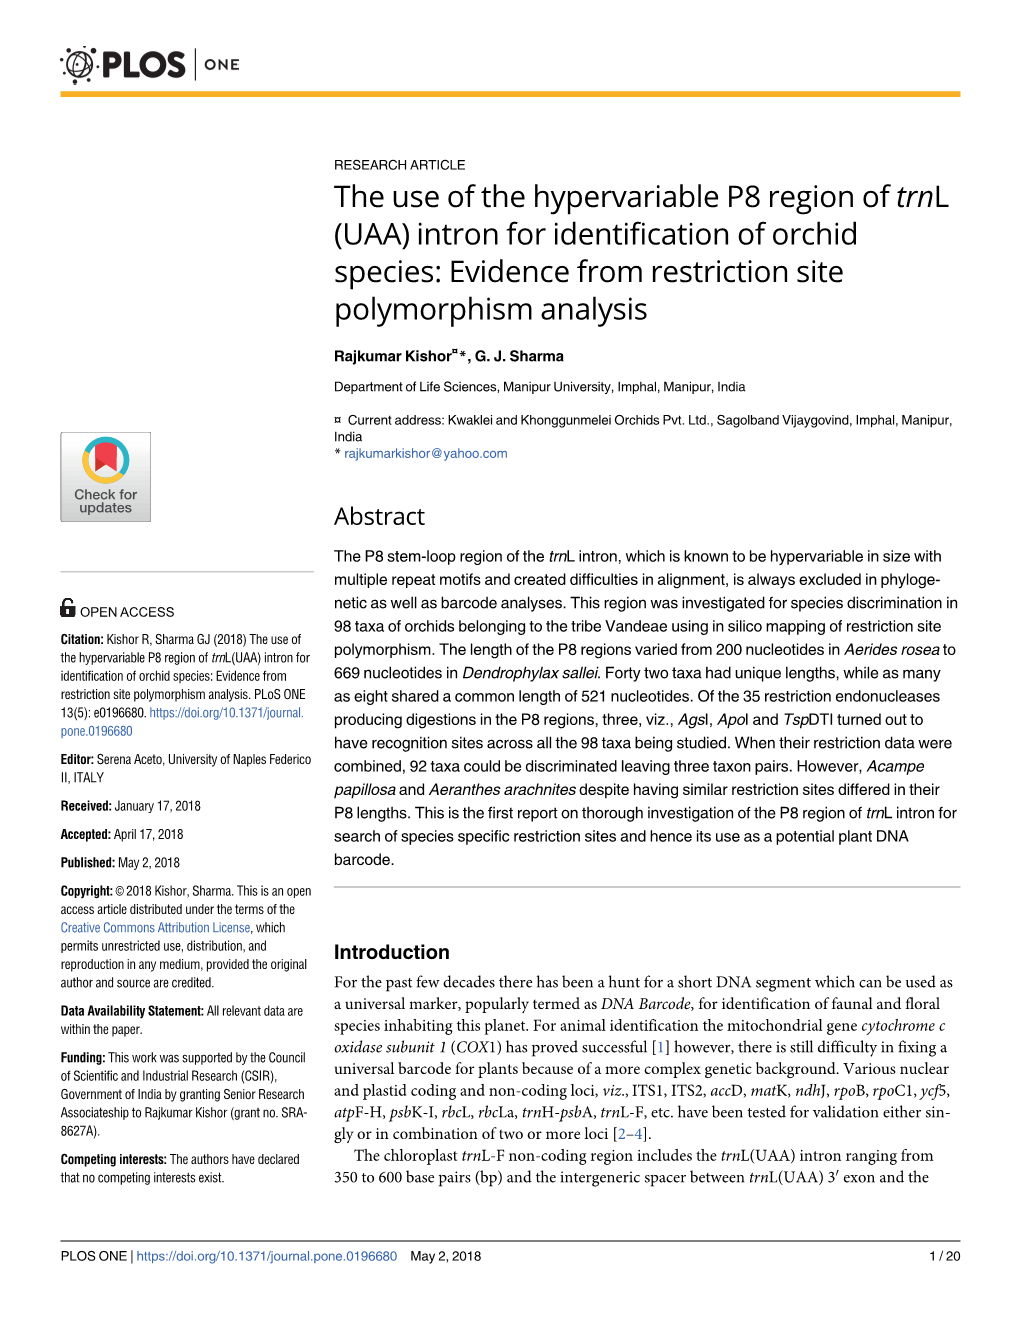 The Use of the Hypervariable P8 Region of Trnl (UAA) Intron for Identification of Orchid Species: Evidence from Restriction Site Polymorphism Analysis